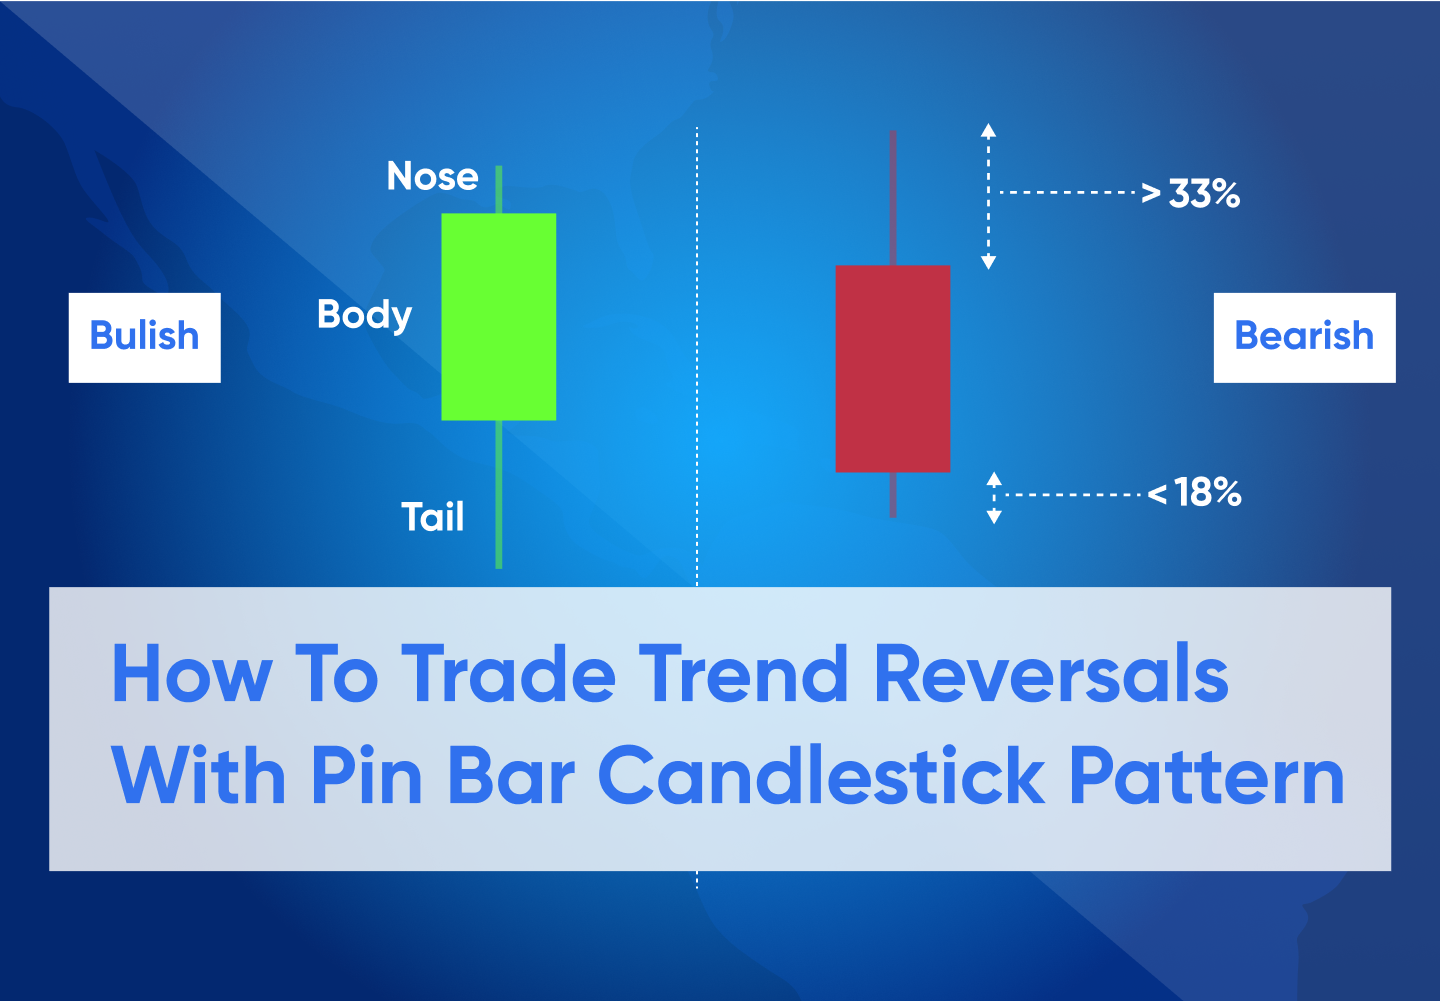 Pin Bar Candlestick Pattern: All You Need To Know About Pin Bar Patterns